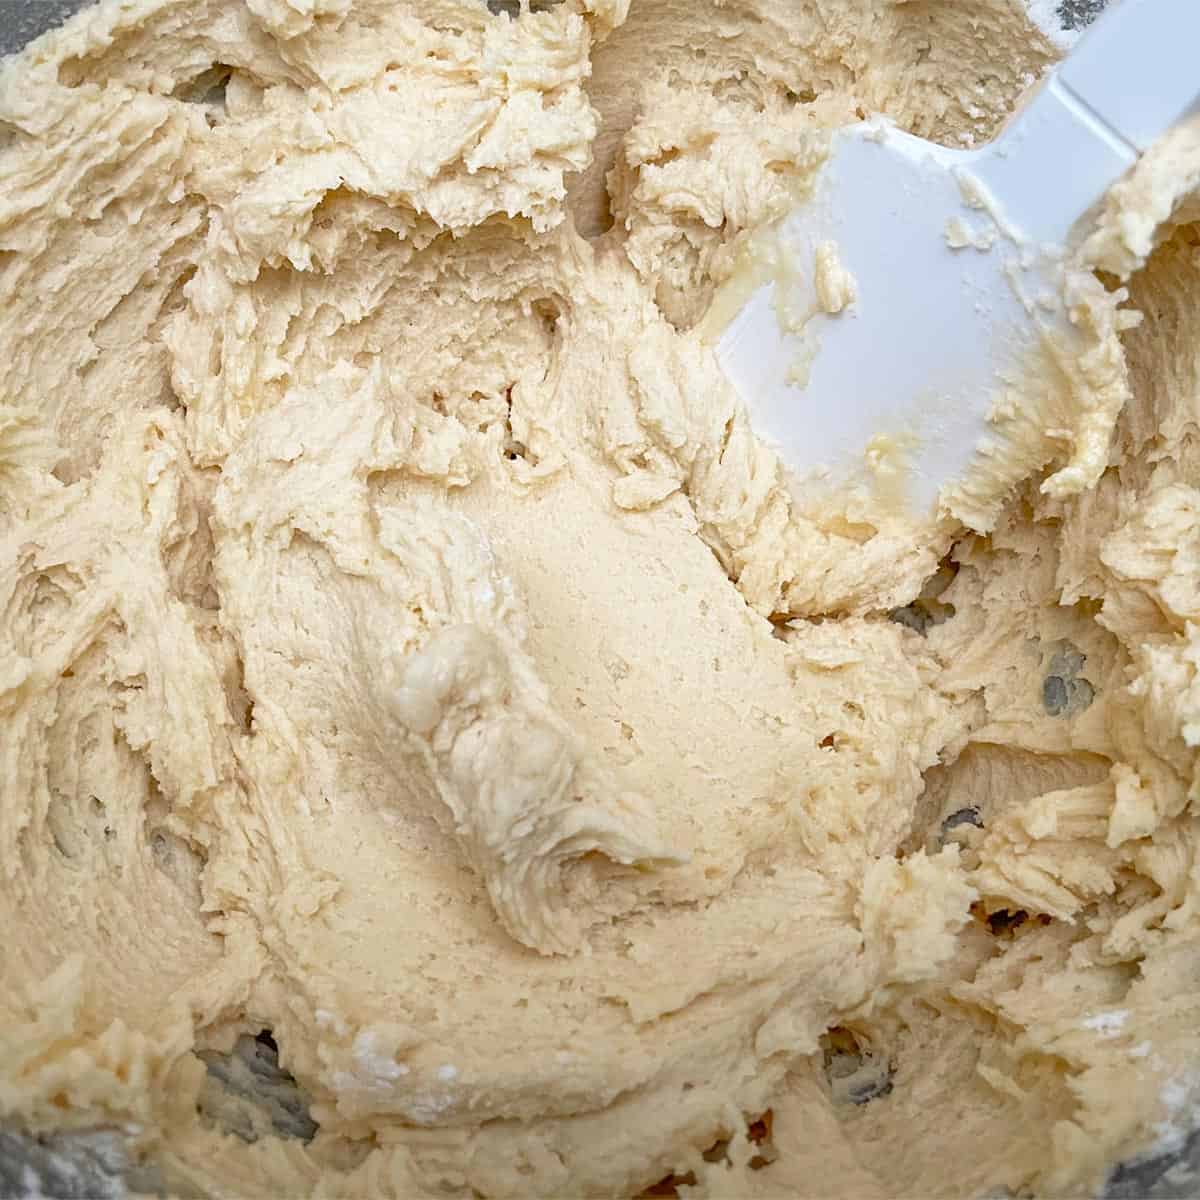 Butter, sugar and flour mixture all together in a mixer bowl.